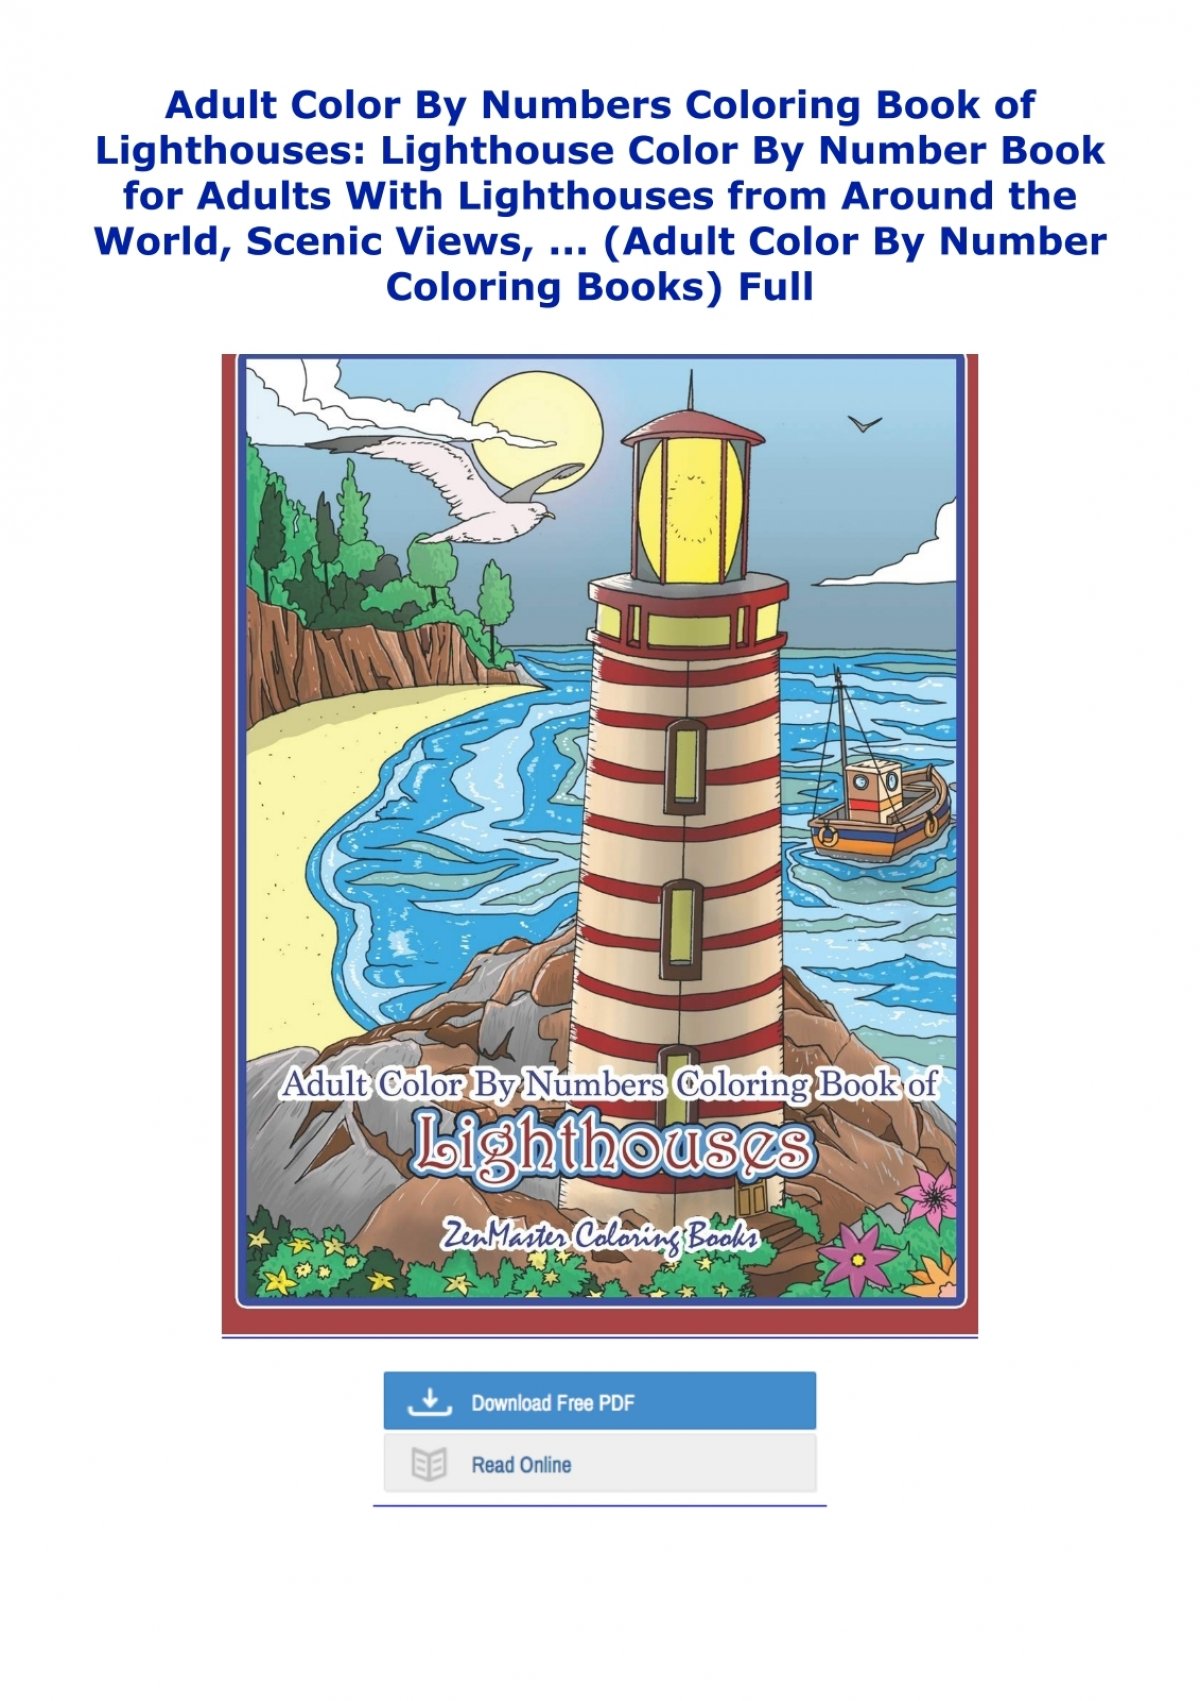 adult-color-by-numbers-coloring-book-of-lighthouses-lighthouse-color-by-number-book-for-adults